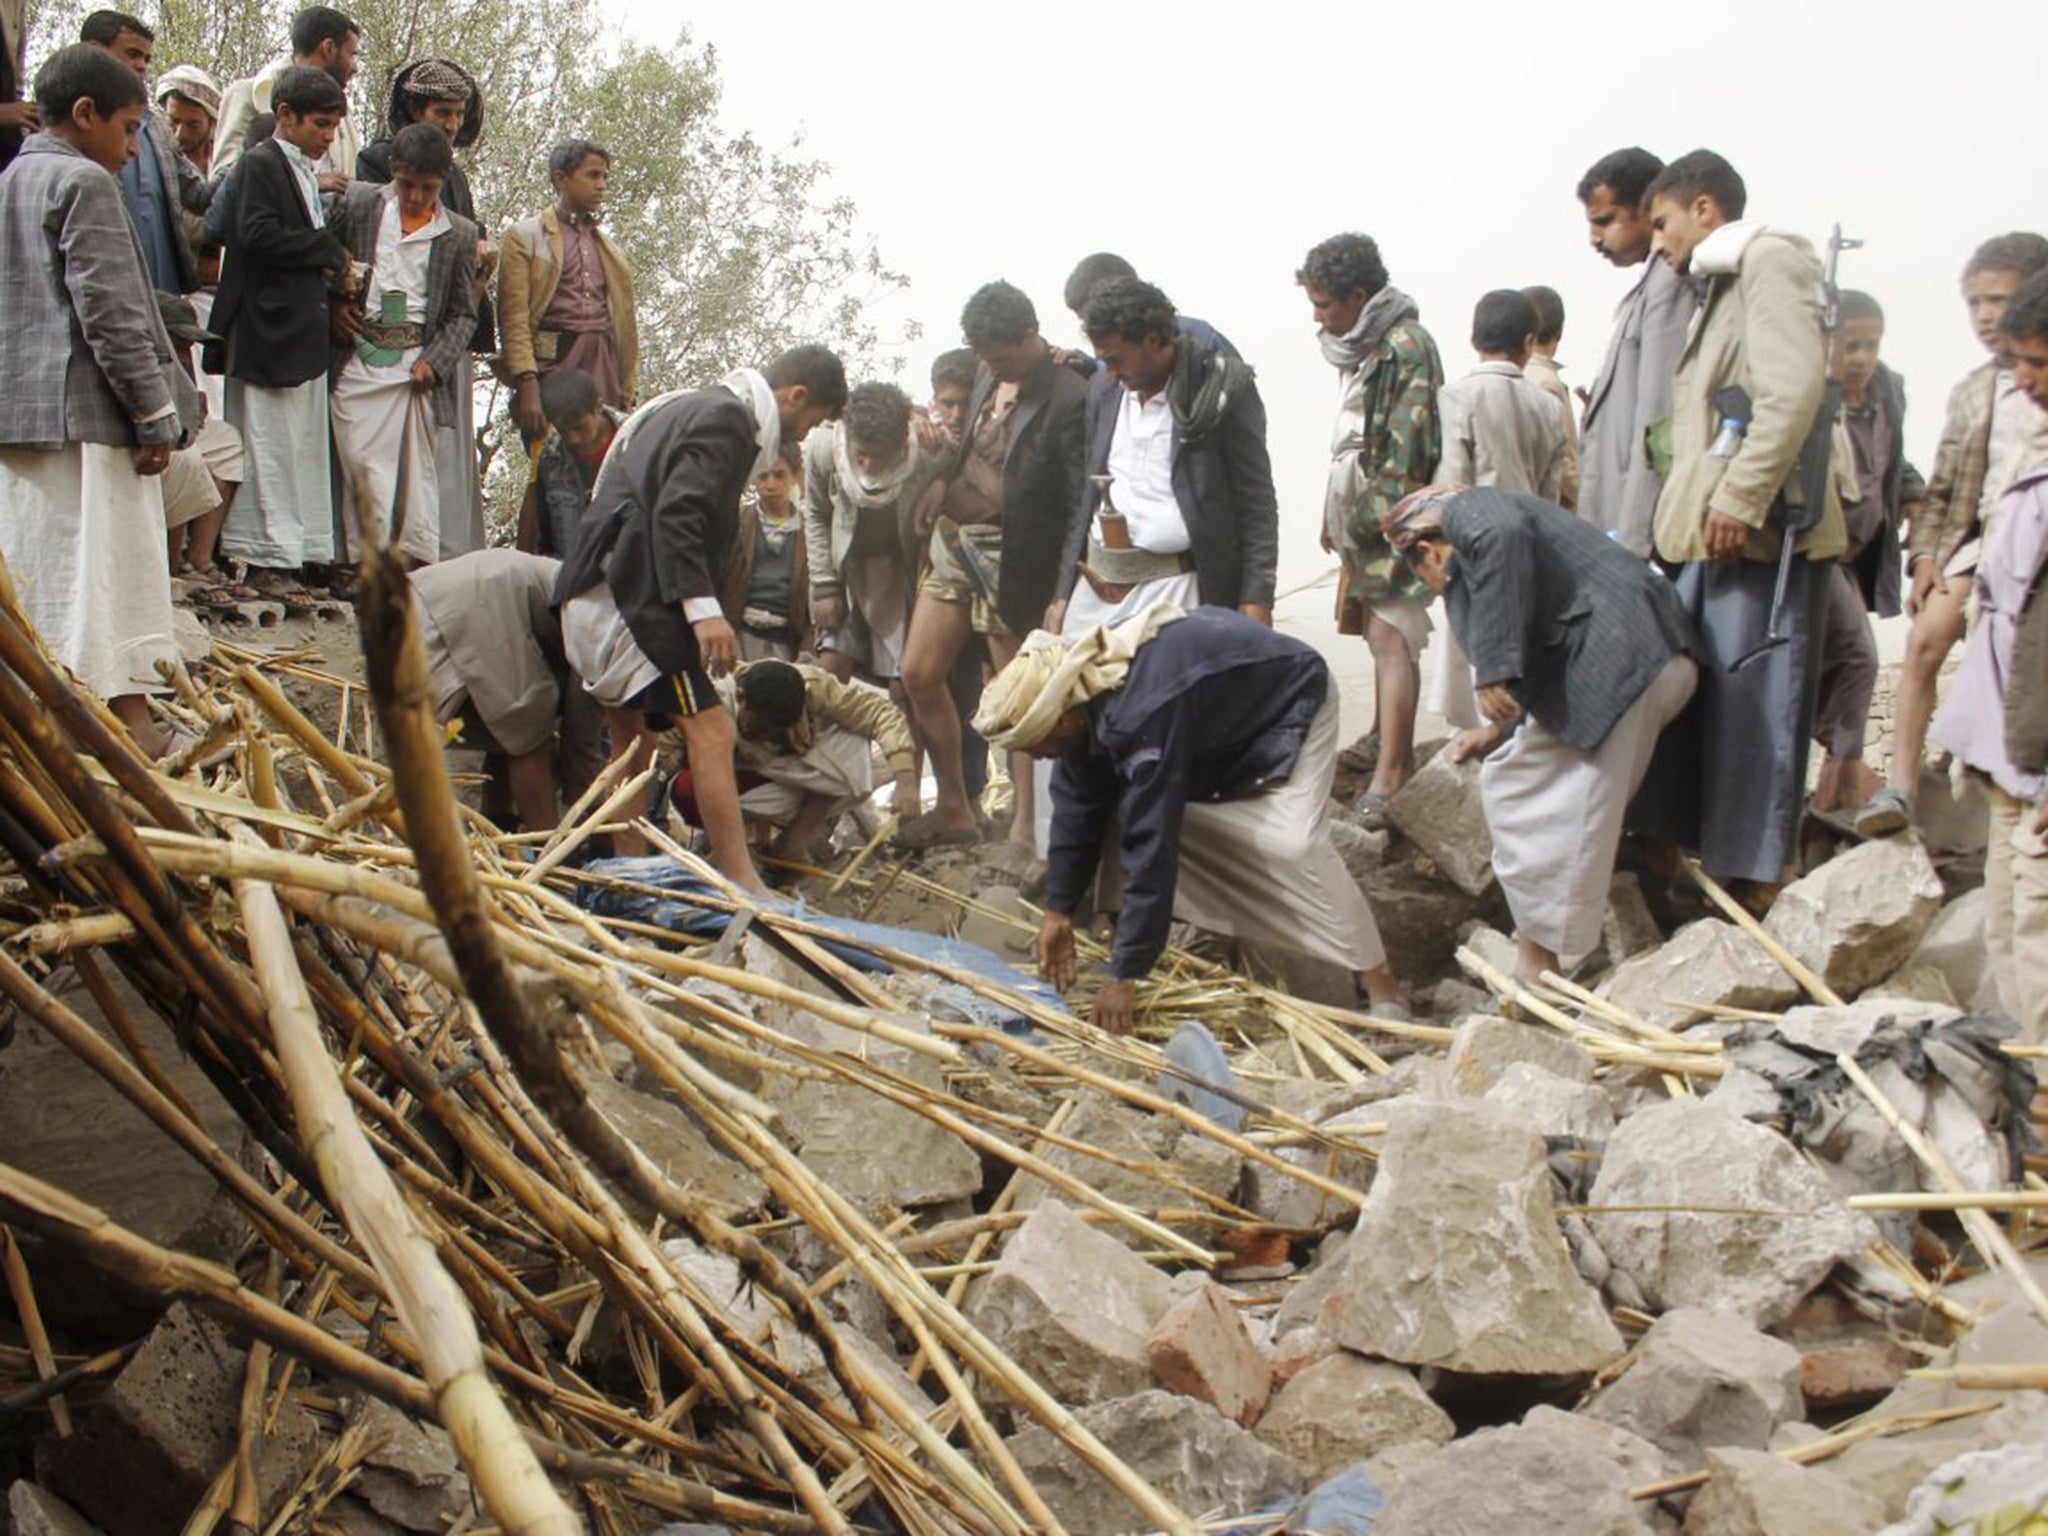 Yemenis search for survivors in the rubble of houses destroyed by Saudi-led airstrikes near Sanaa